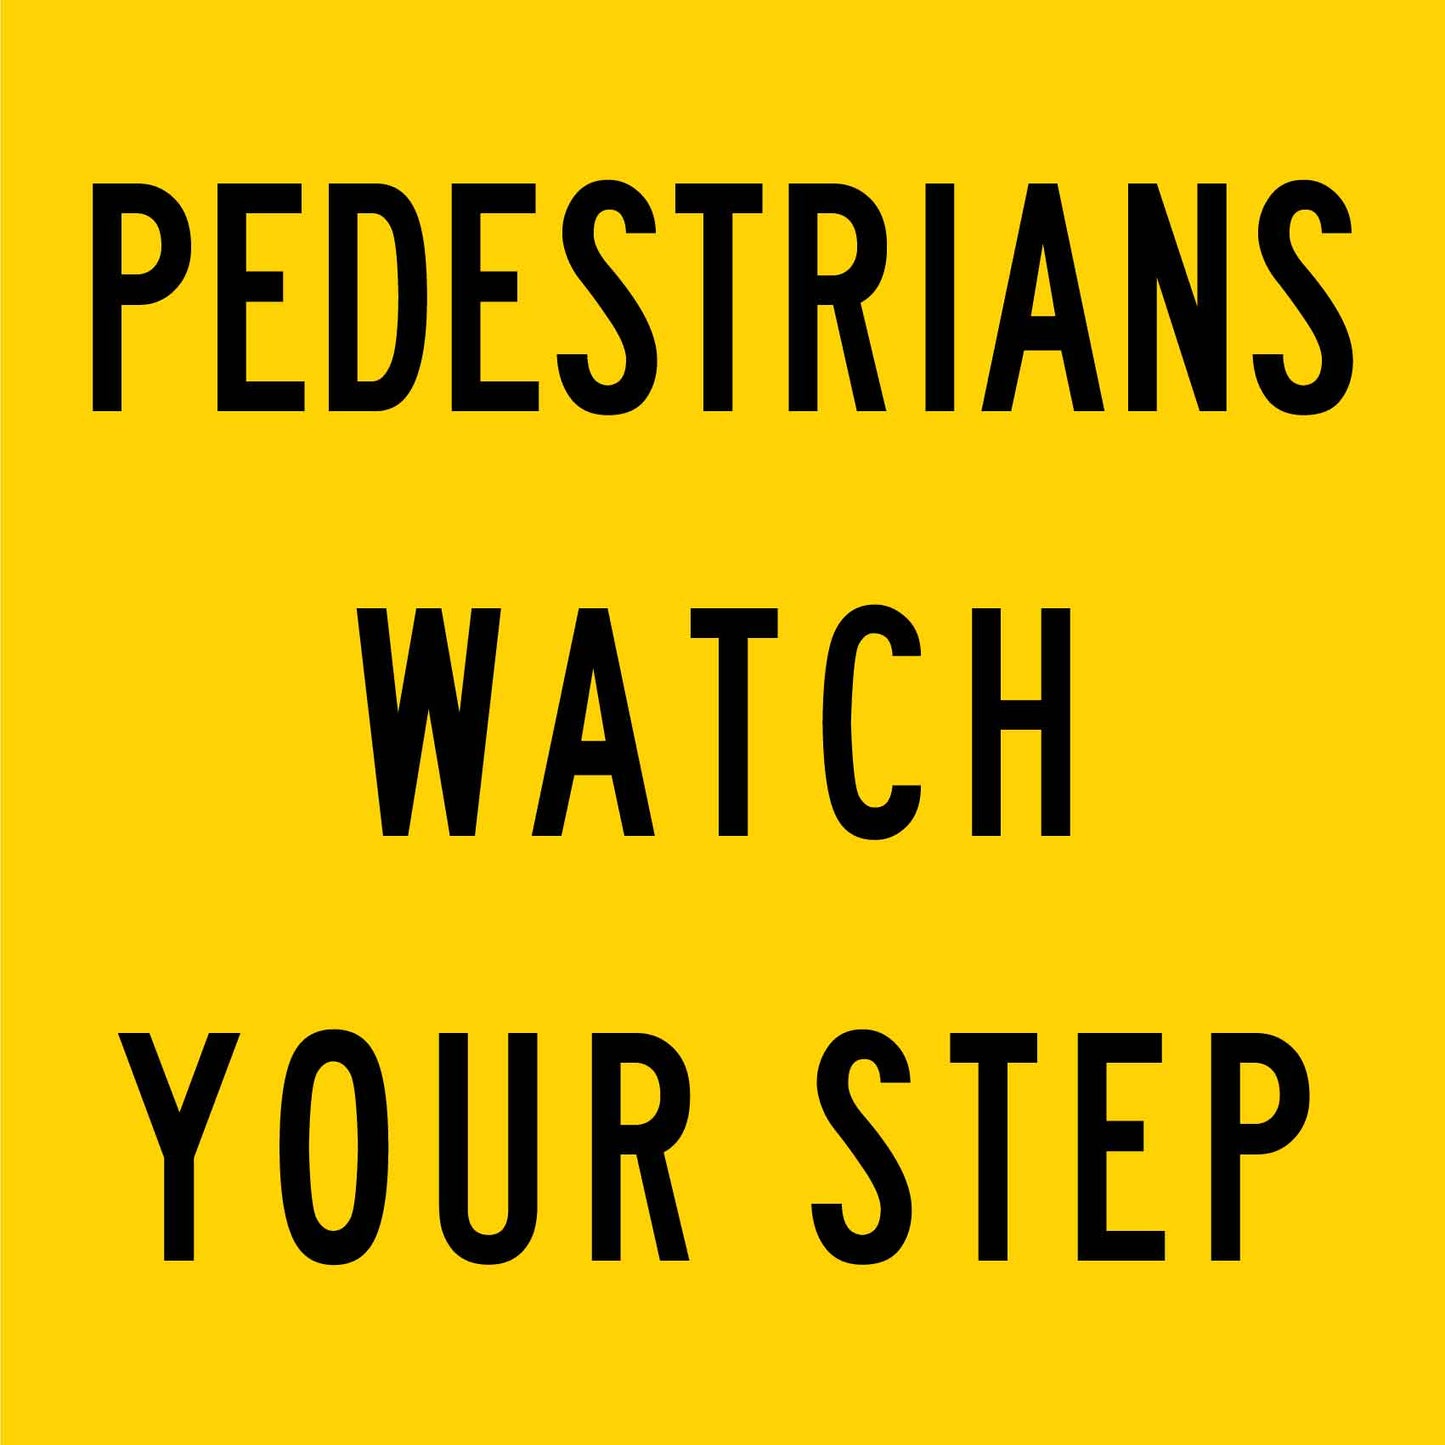 Pedestrians Watch Your Step Multi Message Reflective Traffic Sign